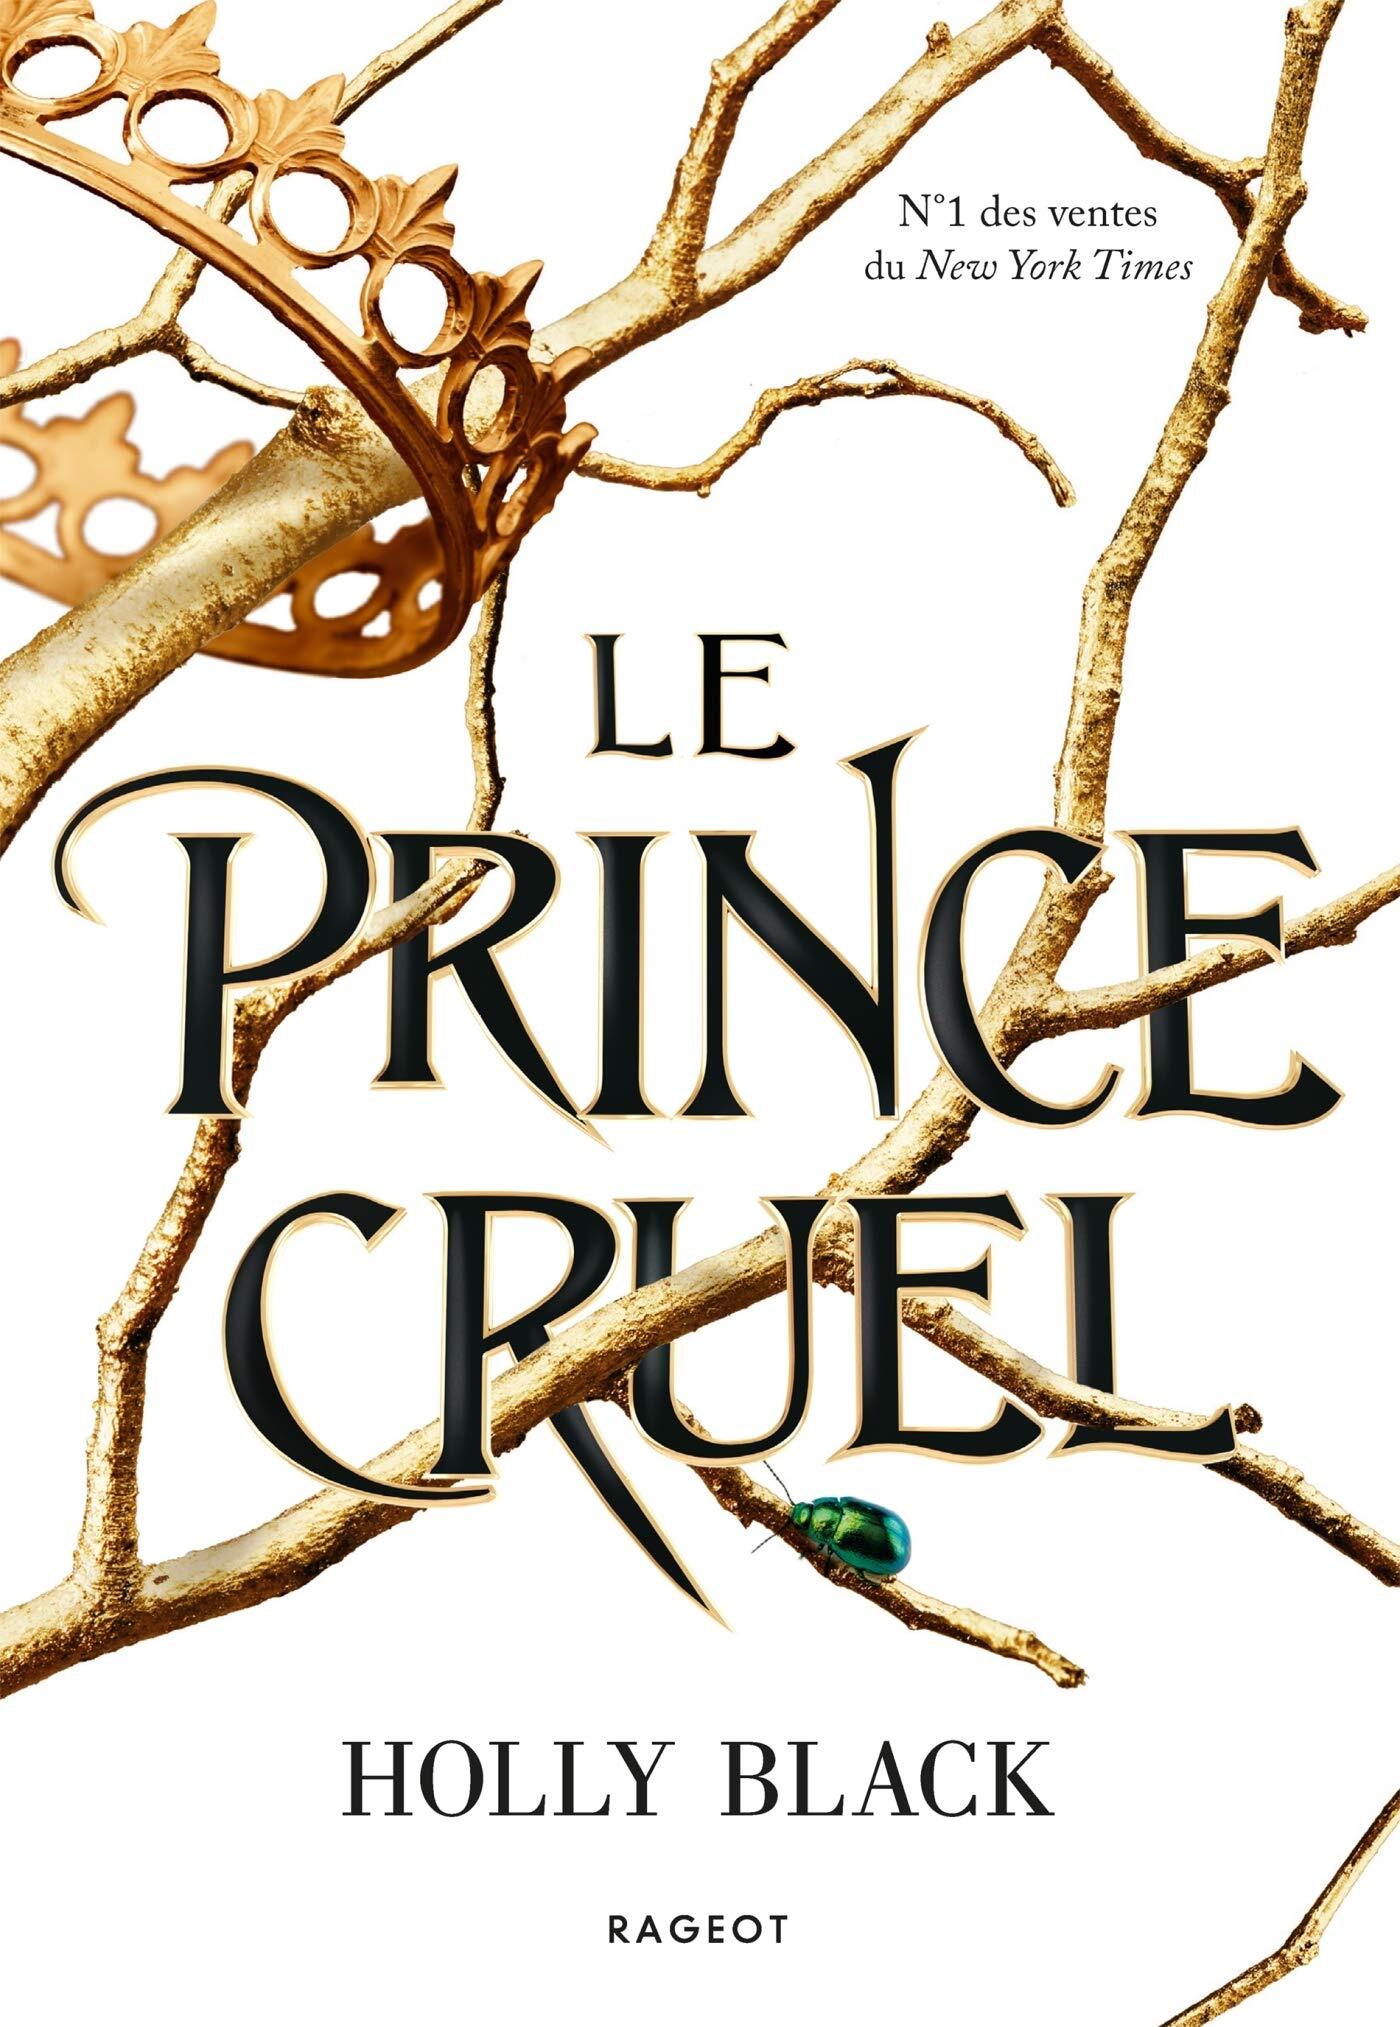 LECTURE COMMUNE D'AVRIL 2022 The-folk-of-the-air-tome-1-le-prince-cruel-1276506